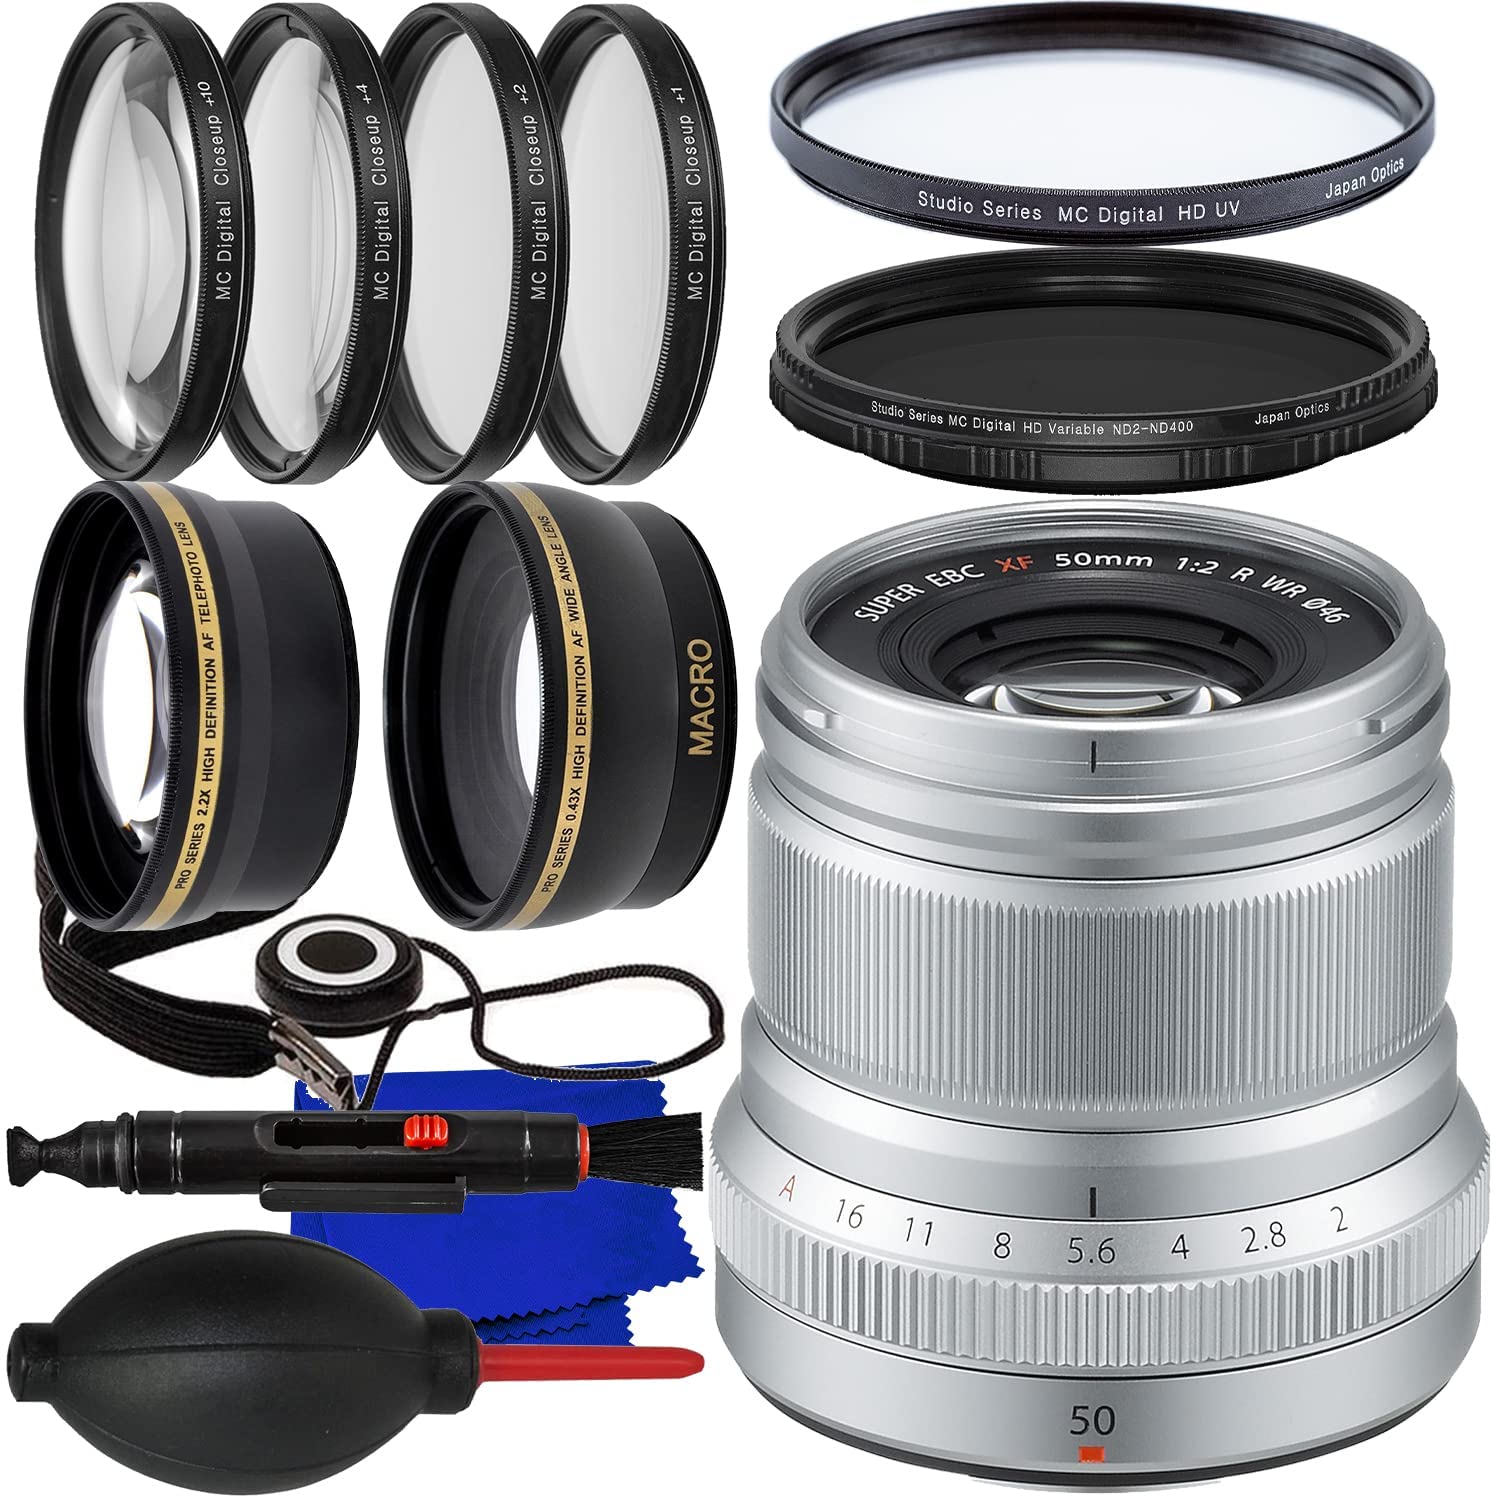 FUJIFILM XF 50mm f/2 R WR Lens (Silver) + Variable Neutral Density Filter (ND2-ND400), 2.2X Telephoto Lens Attachment, 0.43x Wide-Angle Lens Attachment with Detachable Macro & More (17pc Bundle)